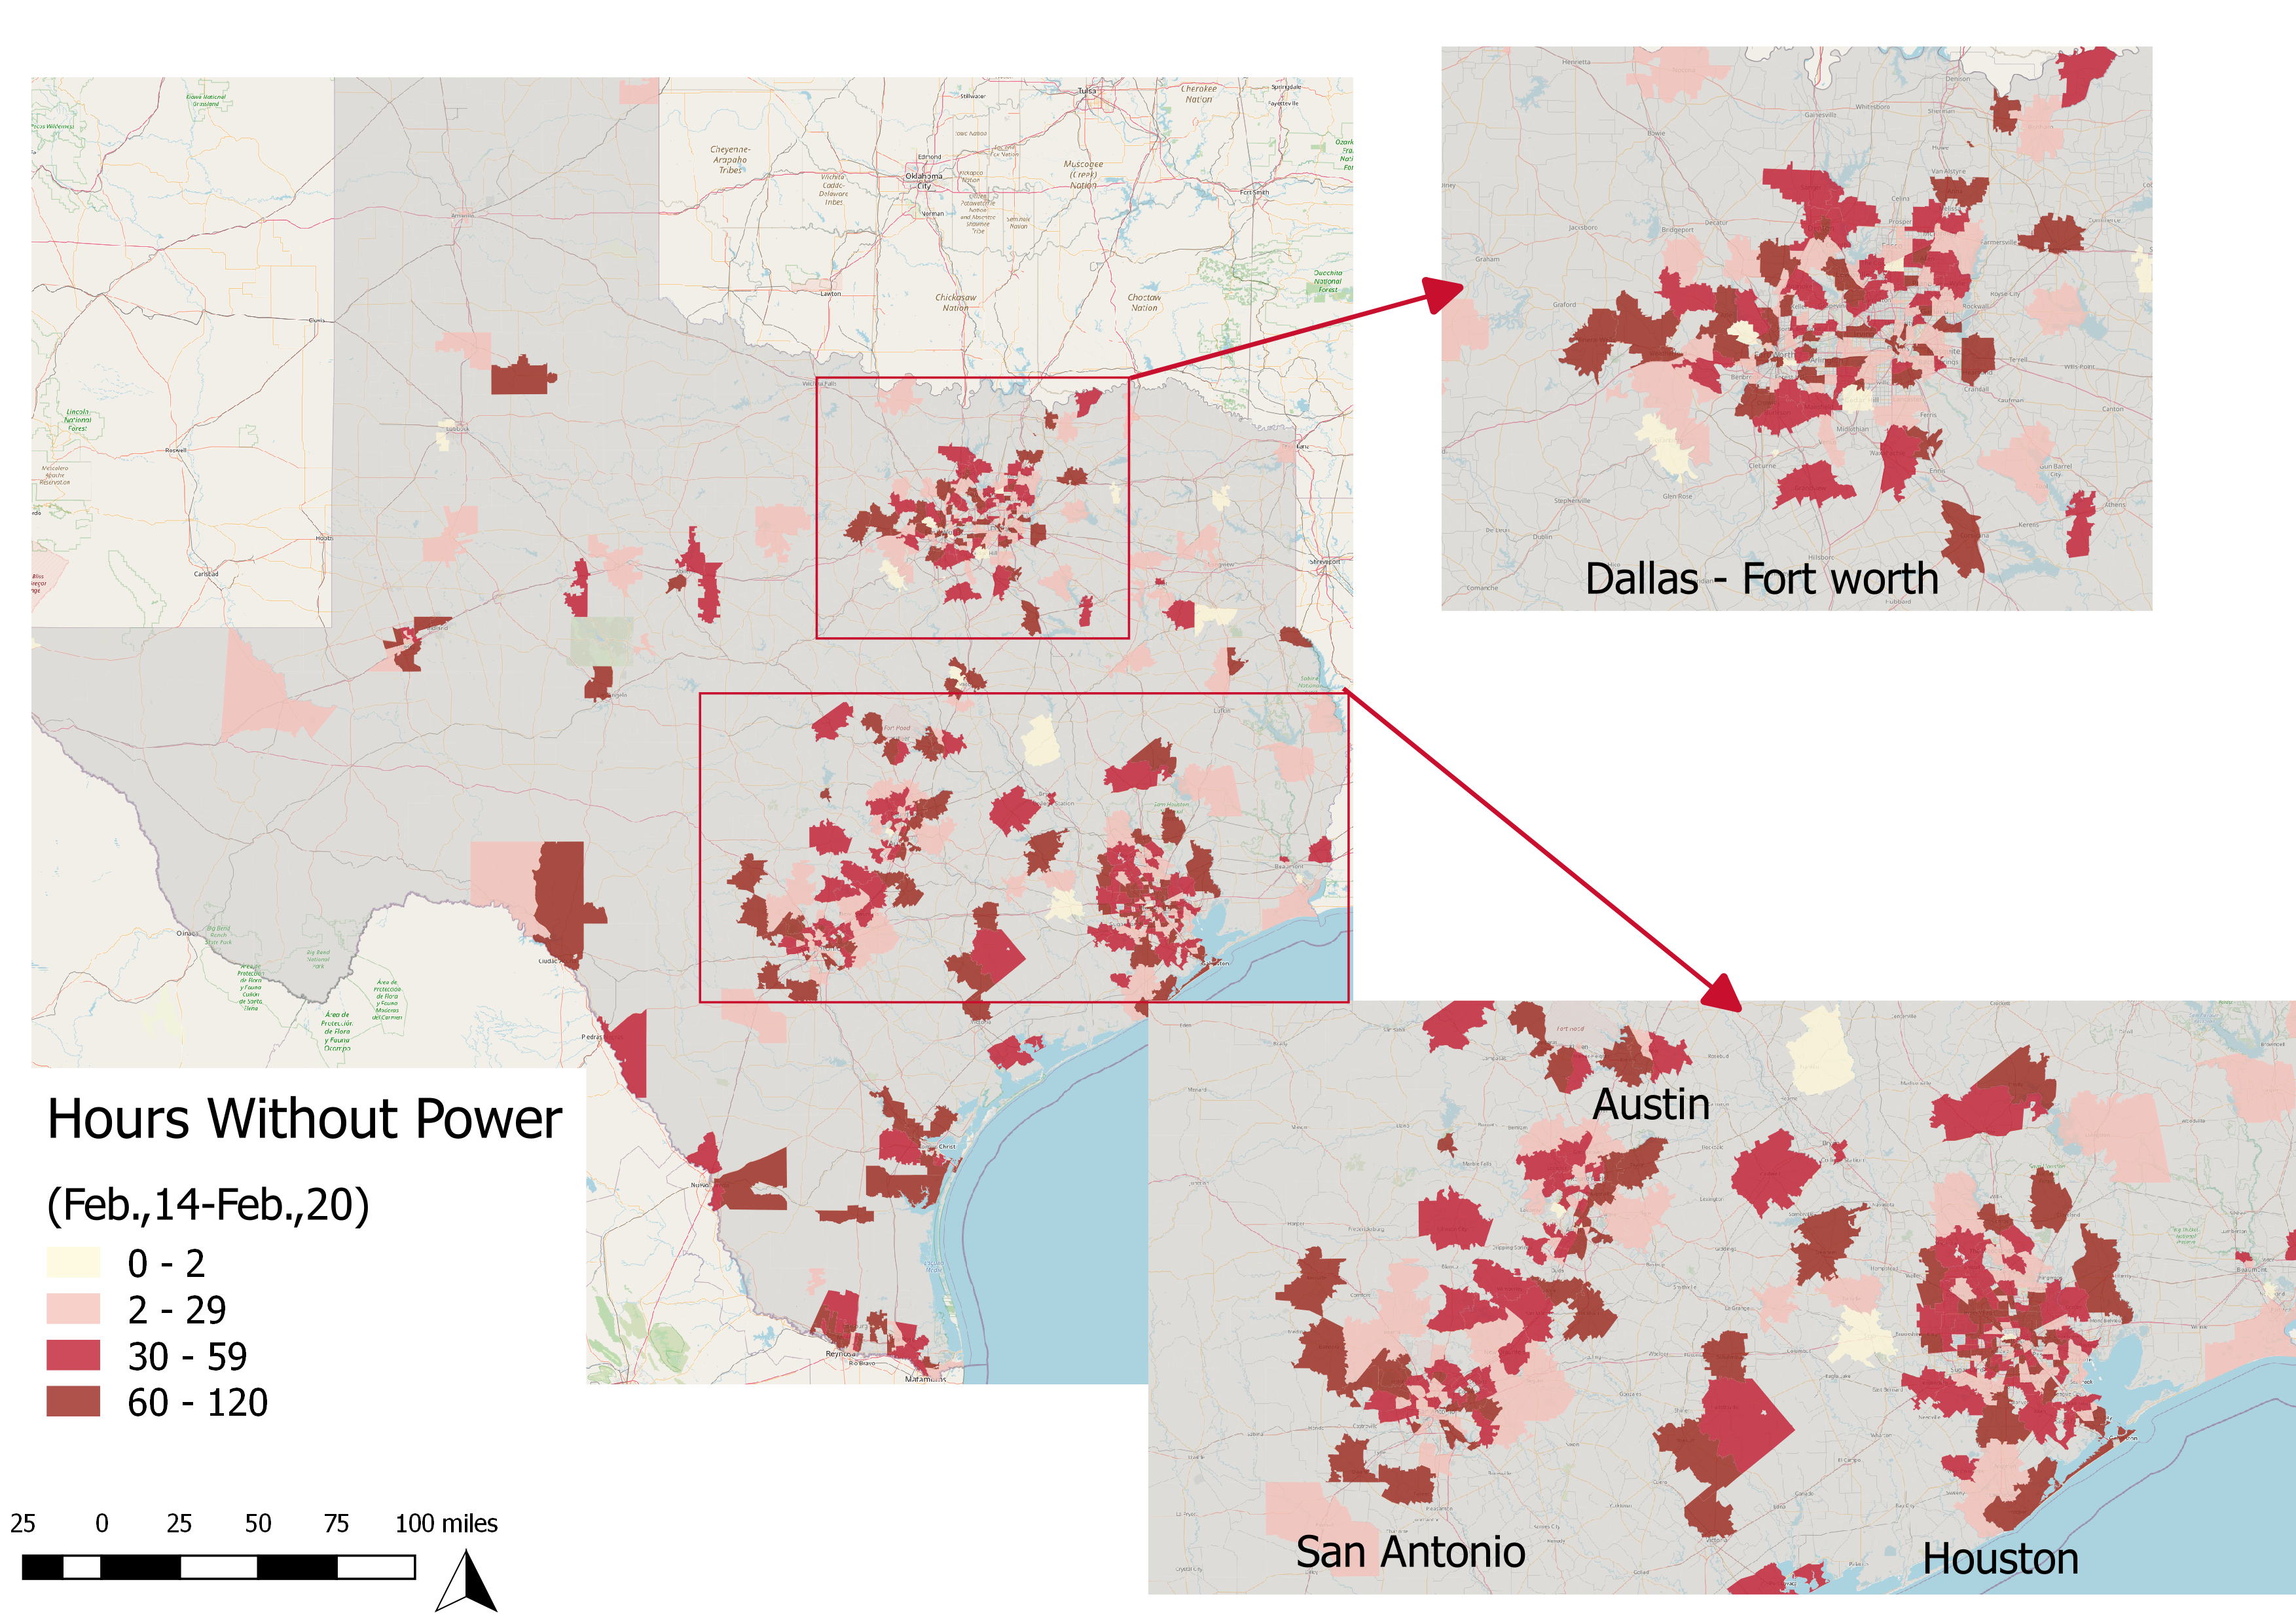 Graphic of Hours without power in Texas